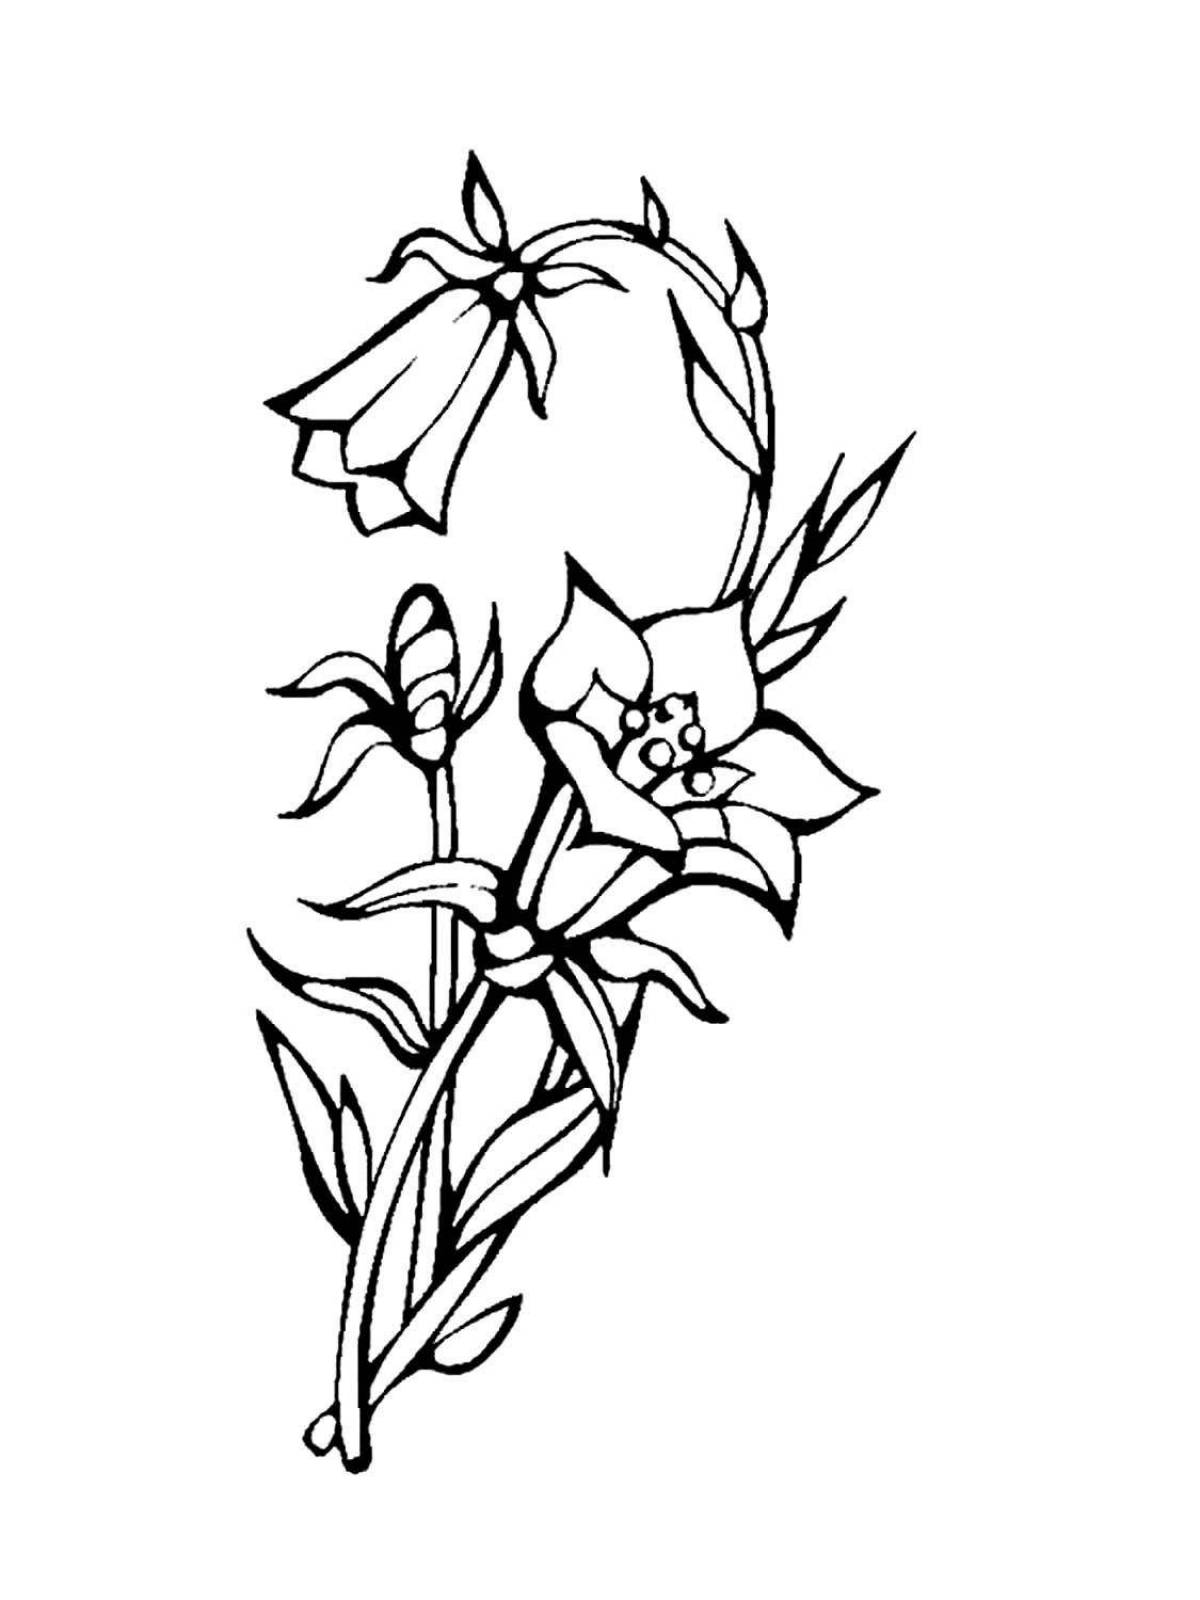 Coloring fairytale flower bell